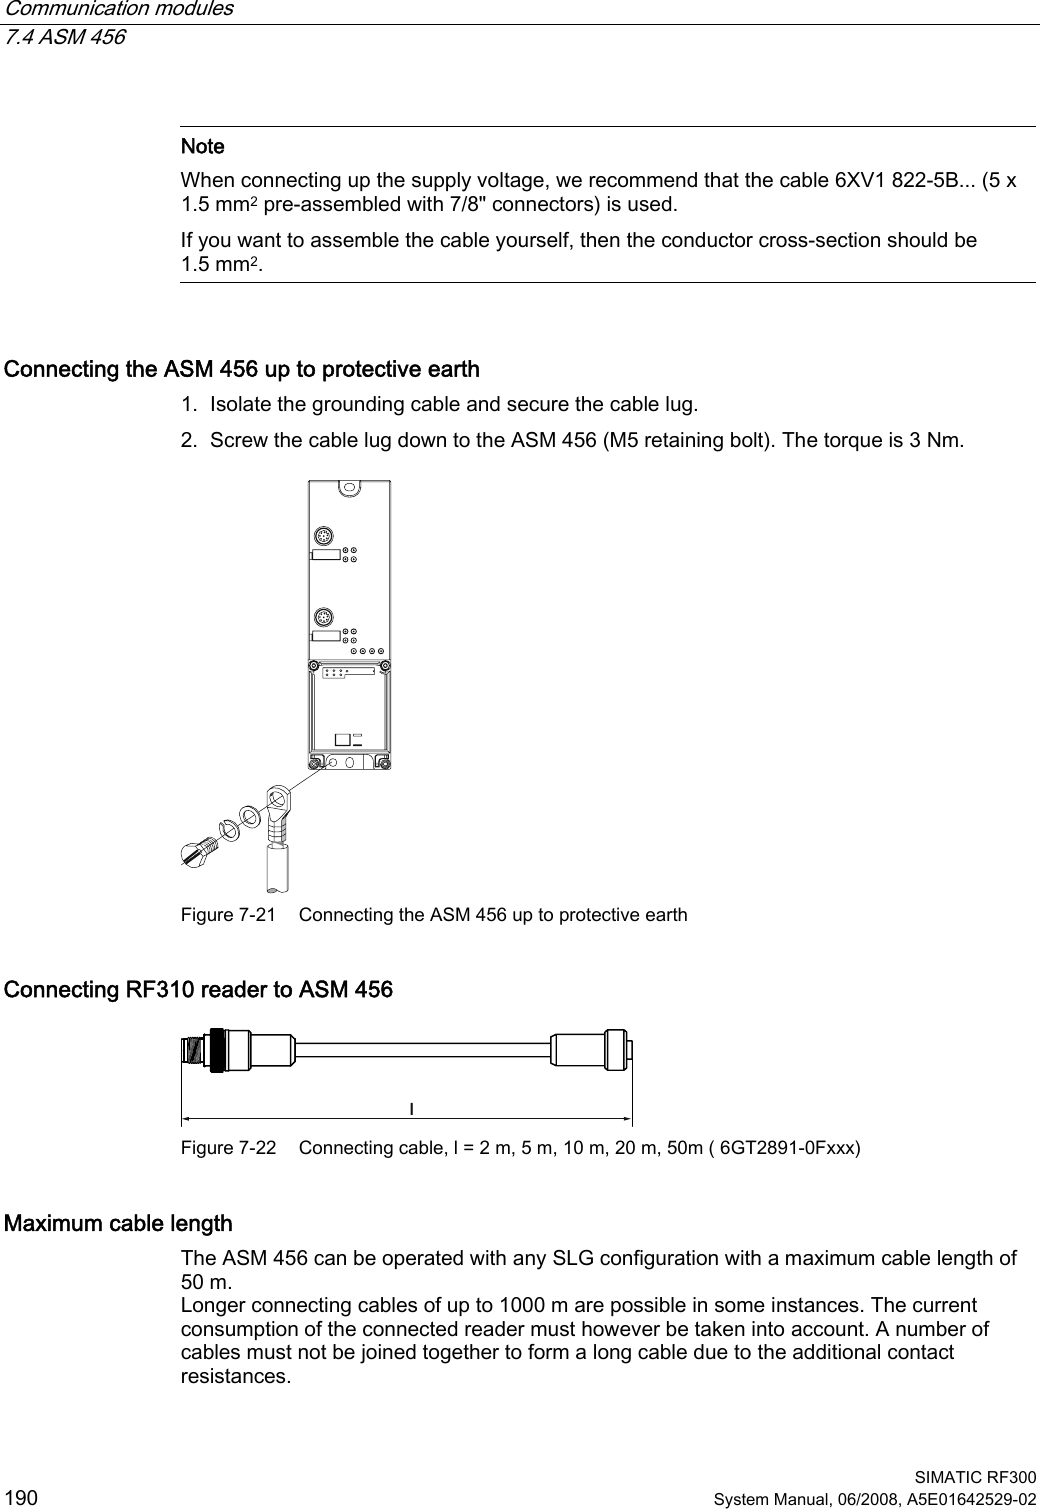 Communication modules   7.4 ASM 456  SIMATIC RF300 190 System Manual, 06/2008, A5E01642529-02   Note When connecting up the supply voltage, we recommend that the cable 6XV1 822-5B... (5 x 1.5 mm2 pre-assembled with 7/8&quot; connectors) is used. If you want to assemble the cable yourself, then the conductor cross-section should be 1.5 mm2.  Connecting the ASM 456 up to protective earth 1. Isolate the grounding cable and secure the cable lug. 2. Screw the cable lug down to the ASM 456 (M5 retaining bolt). The torque is 3 Nm.  Figure 7-21  Connecting the ASM 456 up to protective earth Connecting RF310 reader to ASM 456 O Figure 7-22  Connecting cable, l = 2 m, 5 m, 10 m, 20 m, 50m ( 6GT2891-0Fxxx)  Maximum cable length The ASM 456 can be operated with any SLG configuration with a maximum cable length of 50 m. Longer connecting cables of up to 1000 m are possible in some instances. The current consumption of the connected reader must however be taken into account. A number of cables must not be joined together to form a long cable due to the additional contact resistances. 